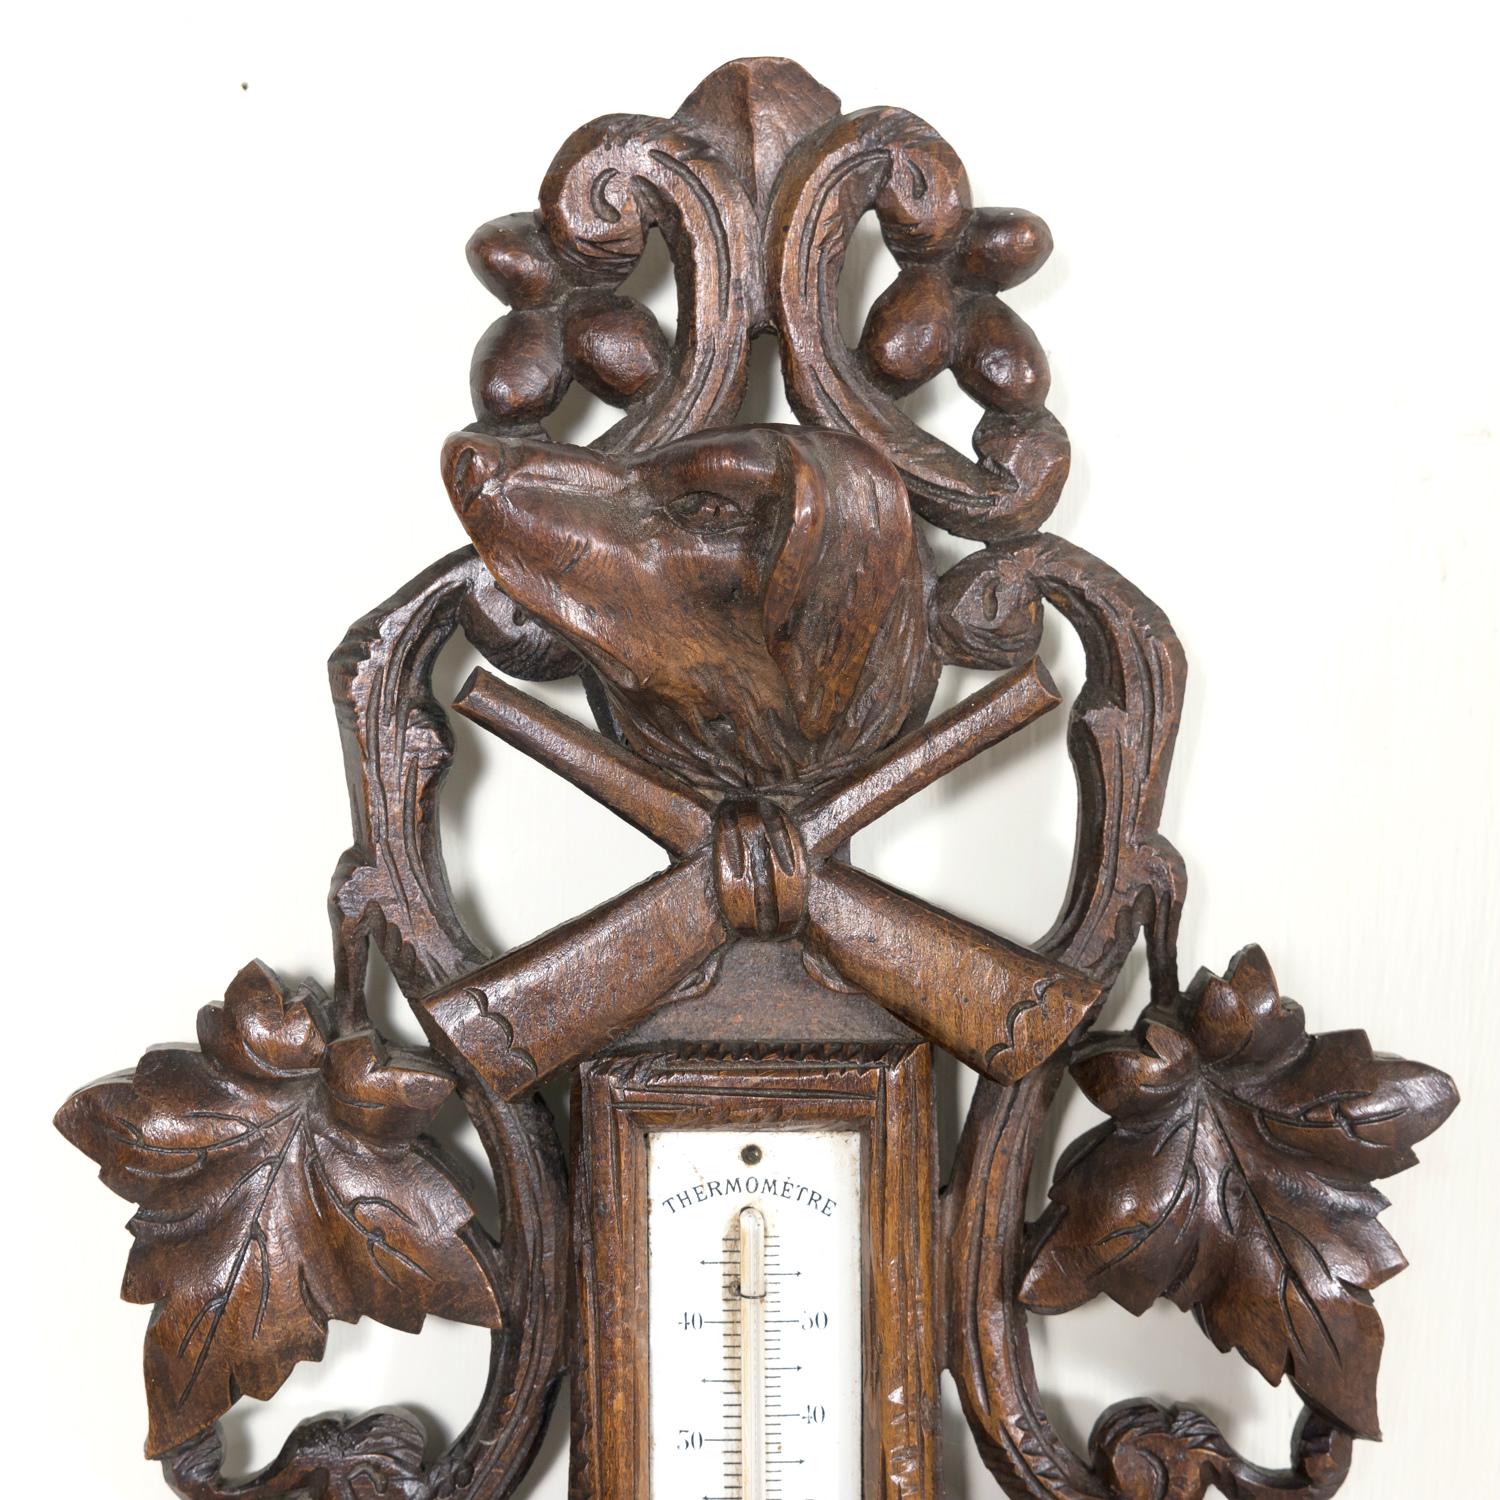 A stunning early 20th century French black forest barometer with thermometer, circa 1900. Found in a hunting lodge in Lyon, this antique weather station features a beautifully hand carved walnut frame presenting forest leaves and branches with a